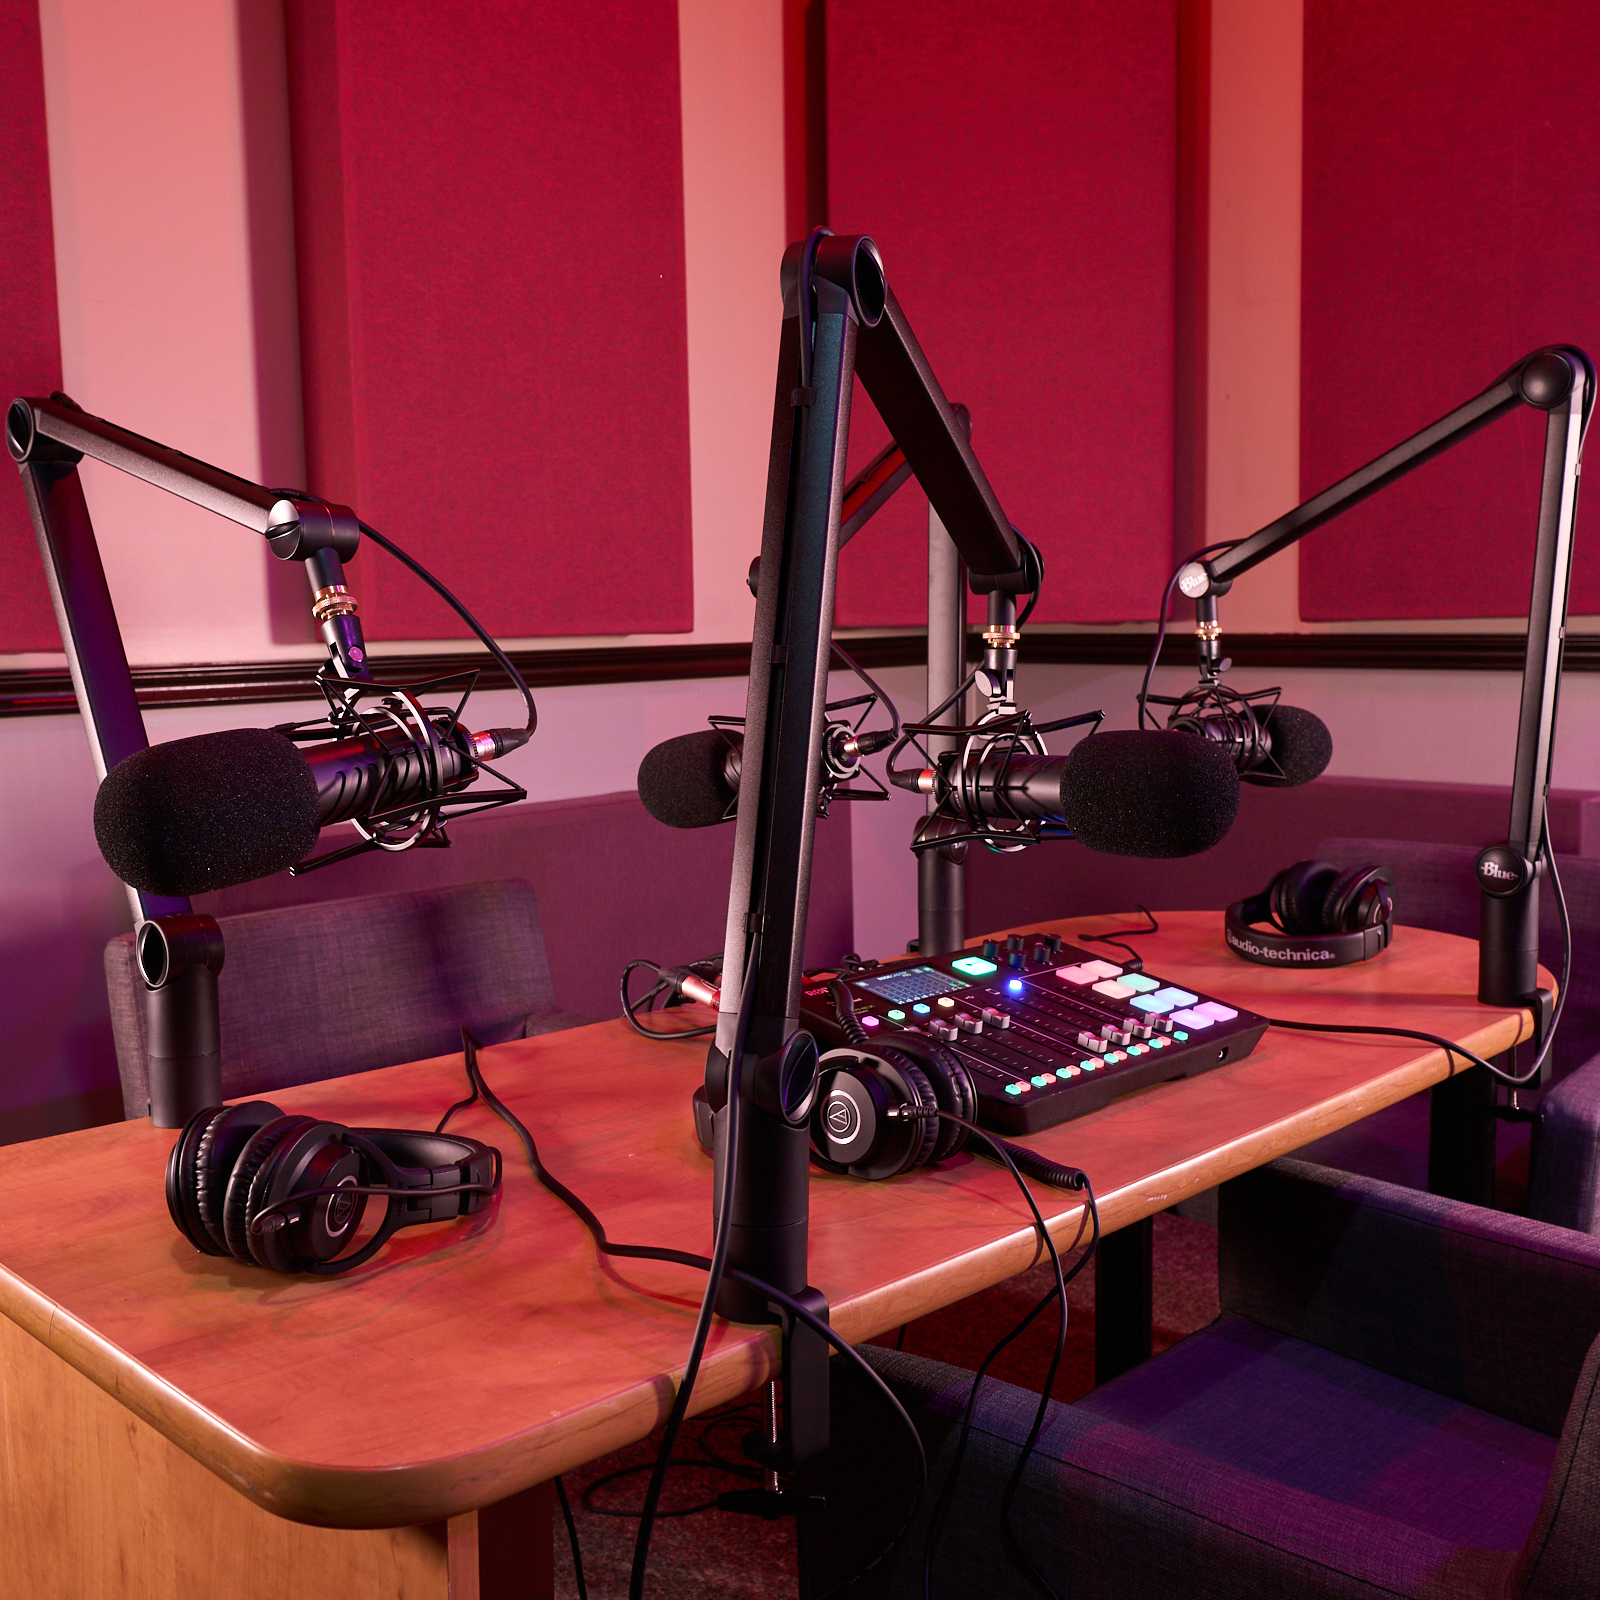 ALWL Podcast Room studio table with microphones on stands and acoustic insulation on walls.